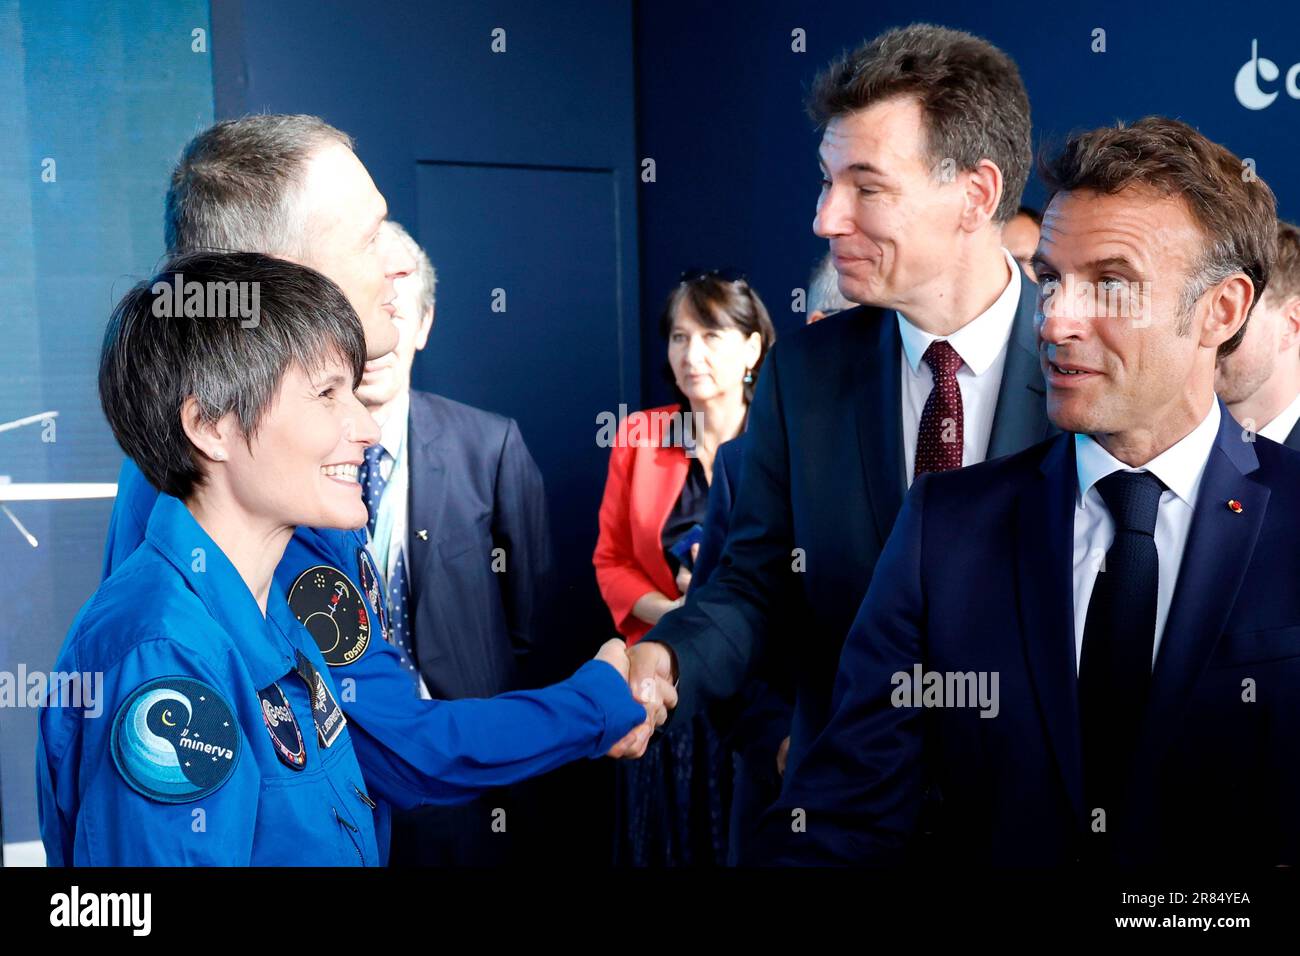 Italian astronaut Samantha Cristoforetti, left, watches French President Emmanuel Macron at the International Paris Air Show at the Paris Le Bourget airport, north of Paris, Monday, June 19, 2023. Aviation industry CEOs and top government officials from around the world descended on the Paris Air Show on Monday for a week of deal-making and demonstrations of the world's latest air and space technology. (Ludovic Marin, Pool via AP) Stock Photo